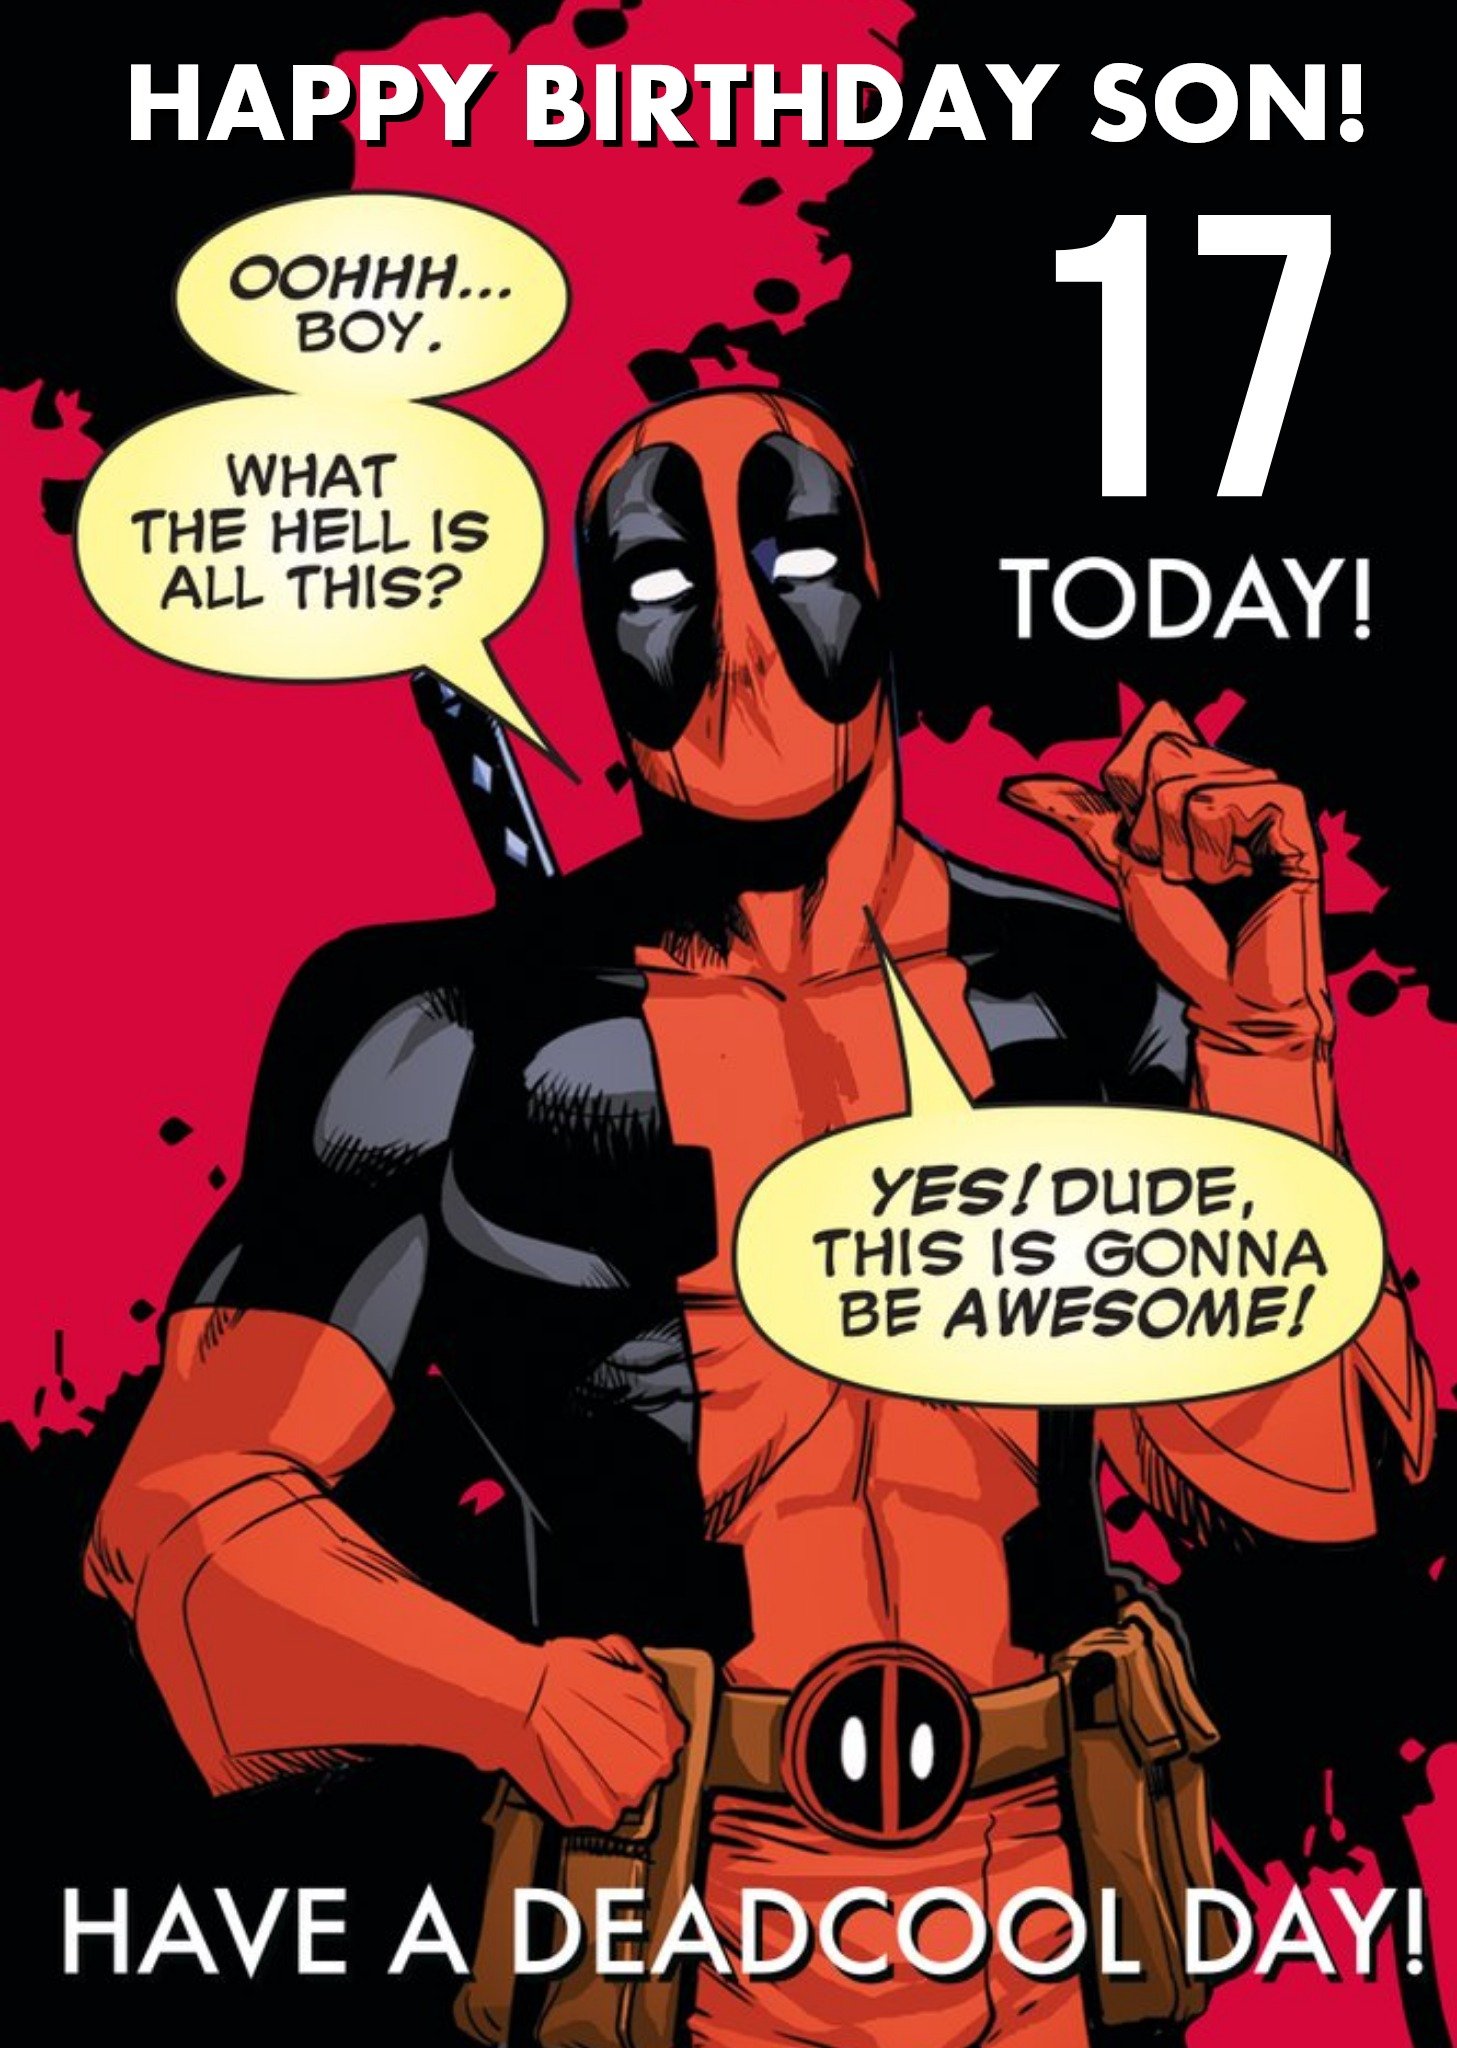 Marvel Funny Deadpool 17th Birthday Card For Your Son, Large